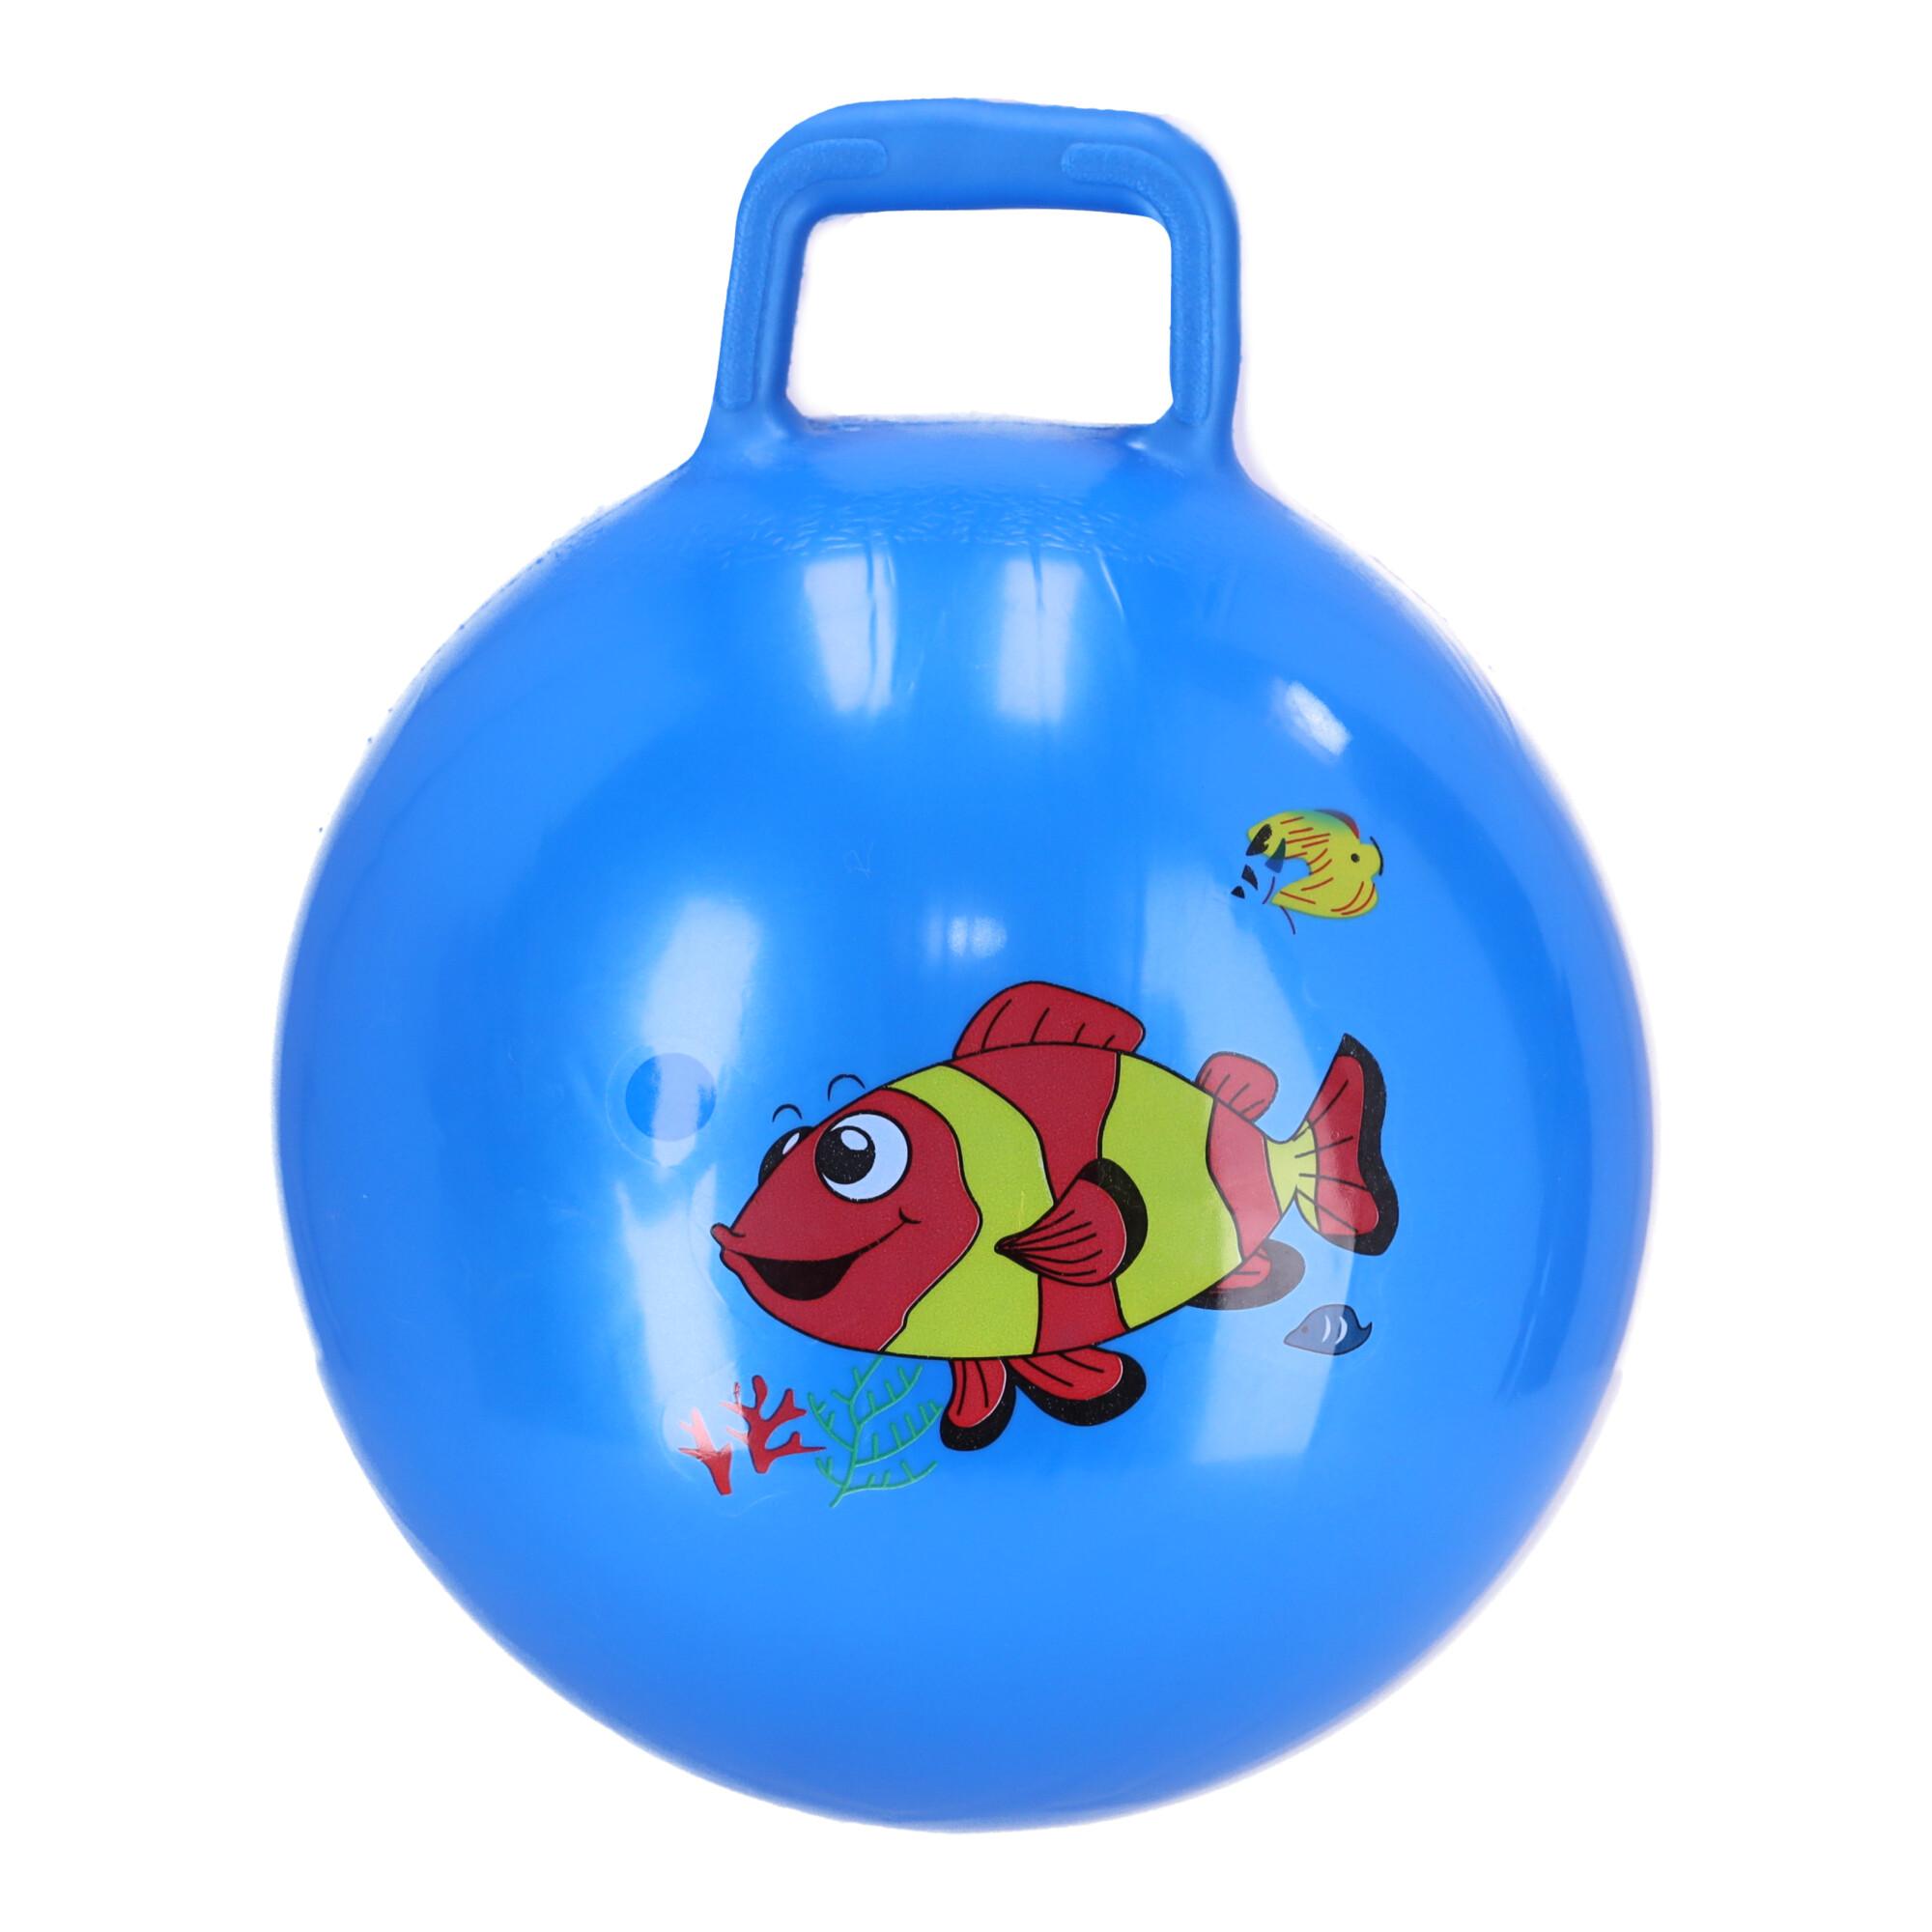 Jumping ball, jumper for children with handles - blue